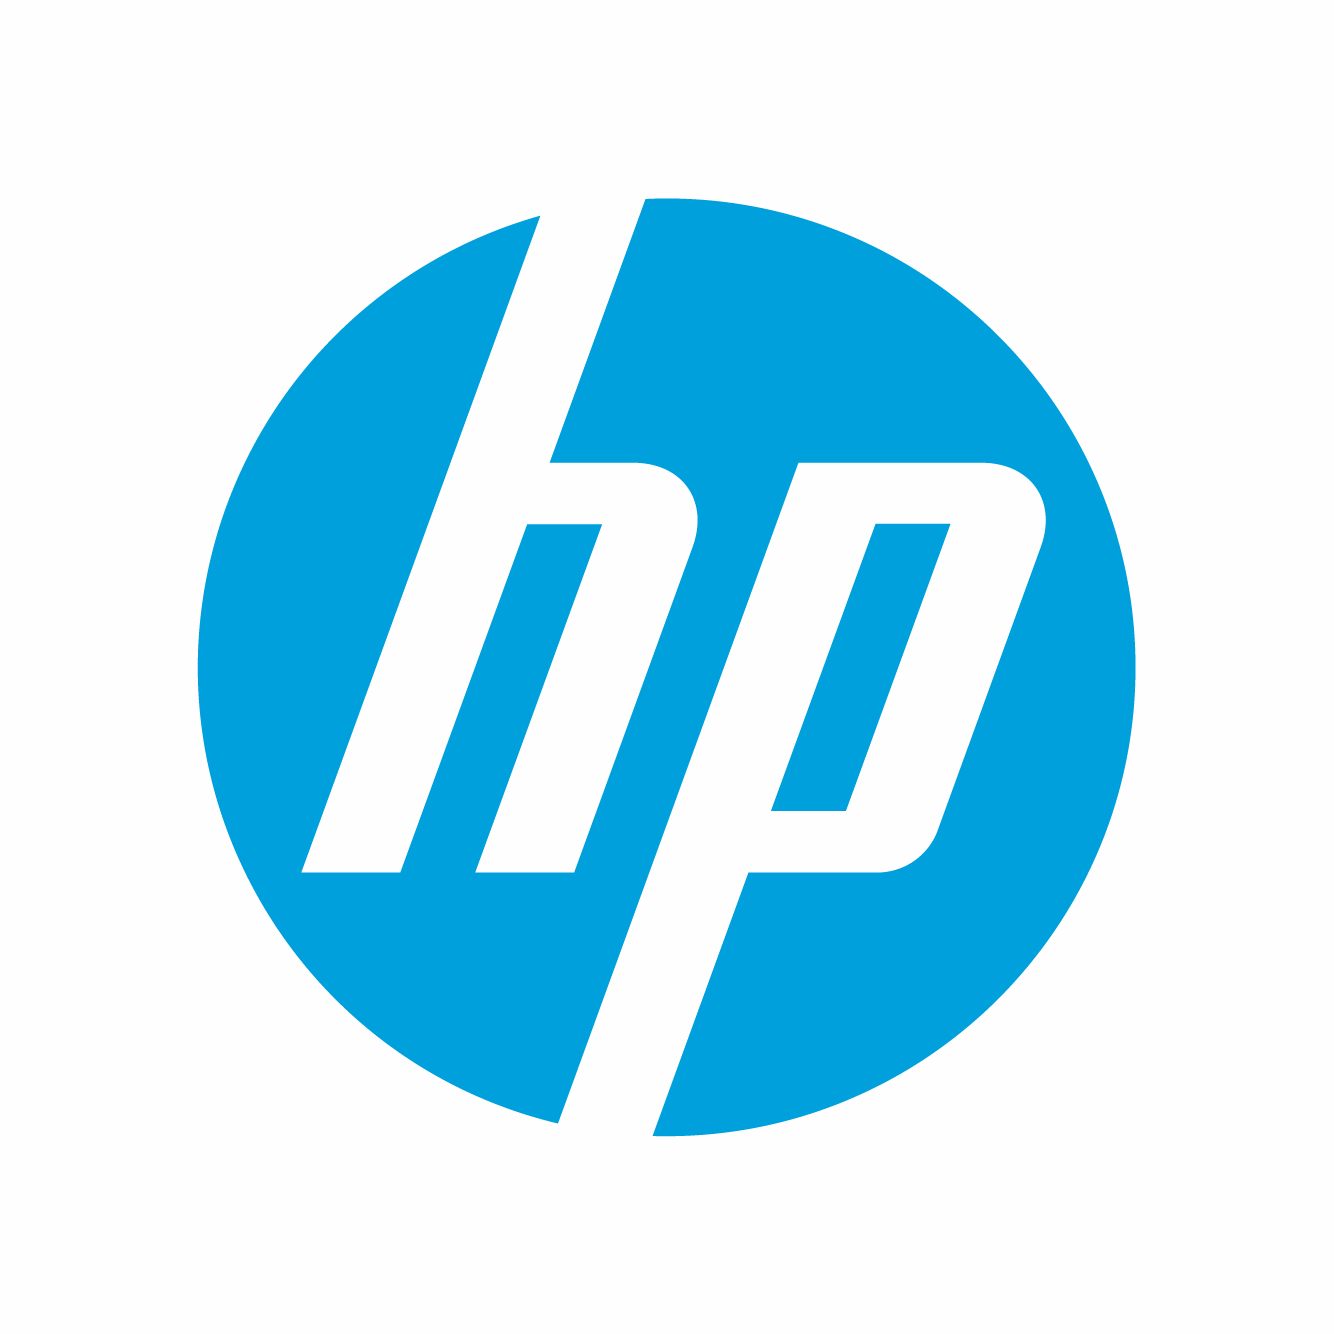 https://securetech.ae/wp-content/uploads/2019/02/23.HP_.png